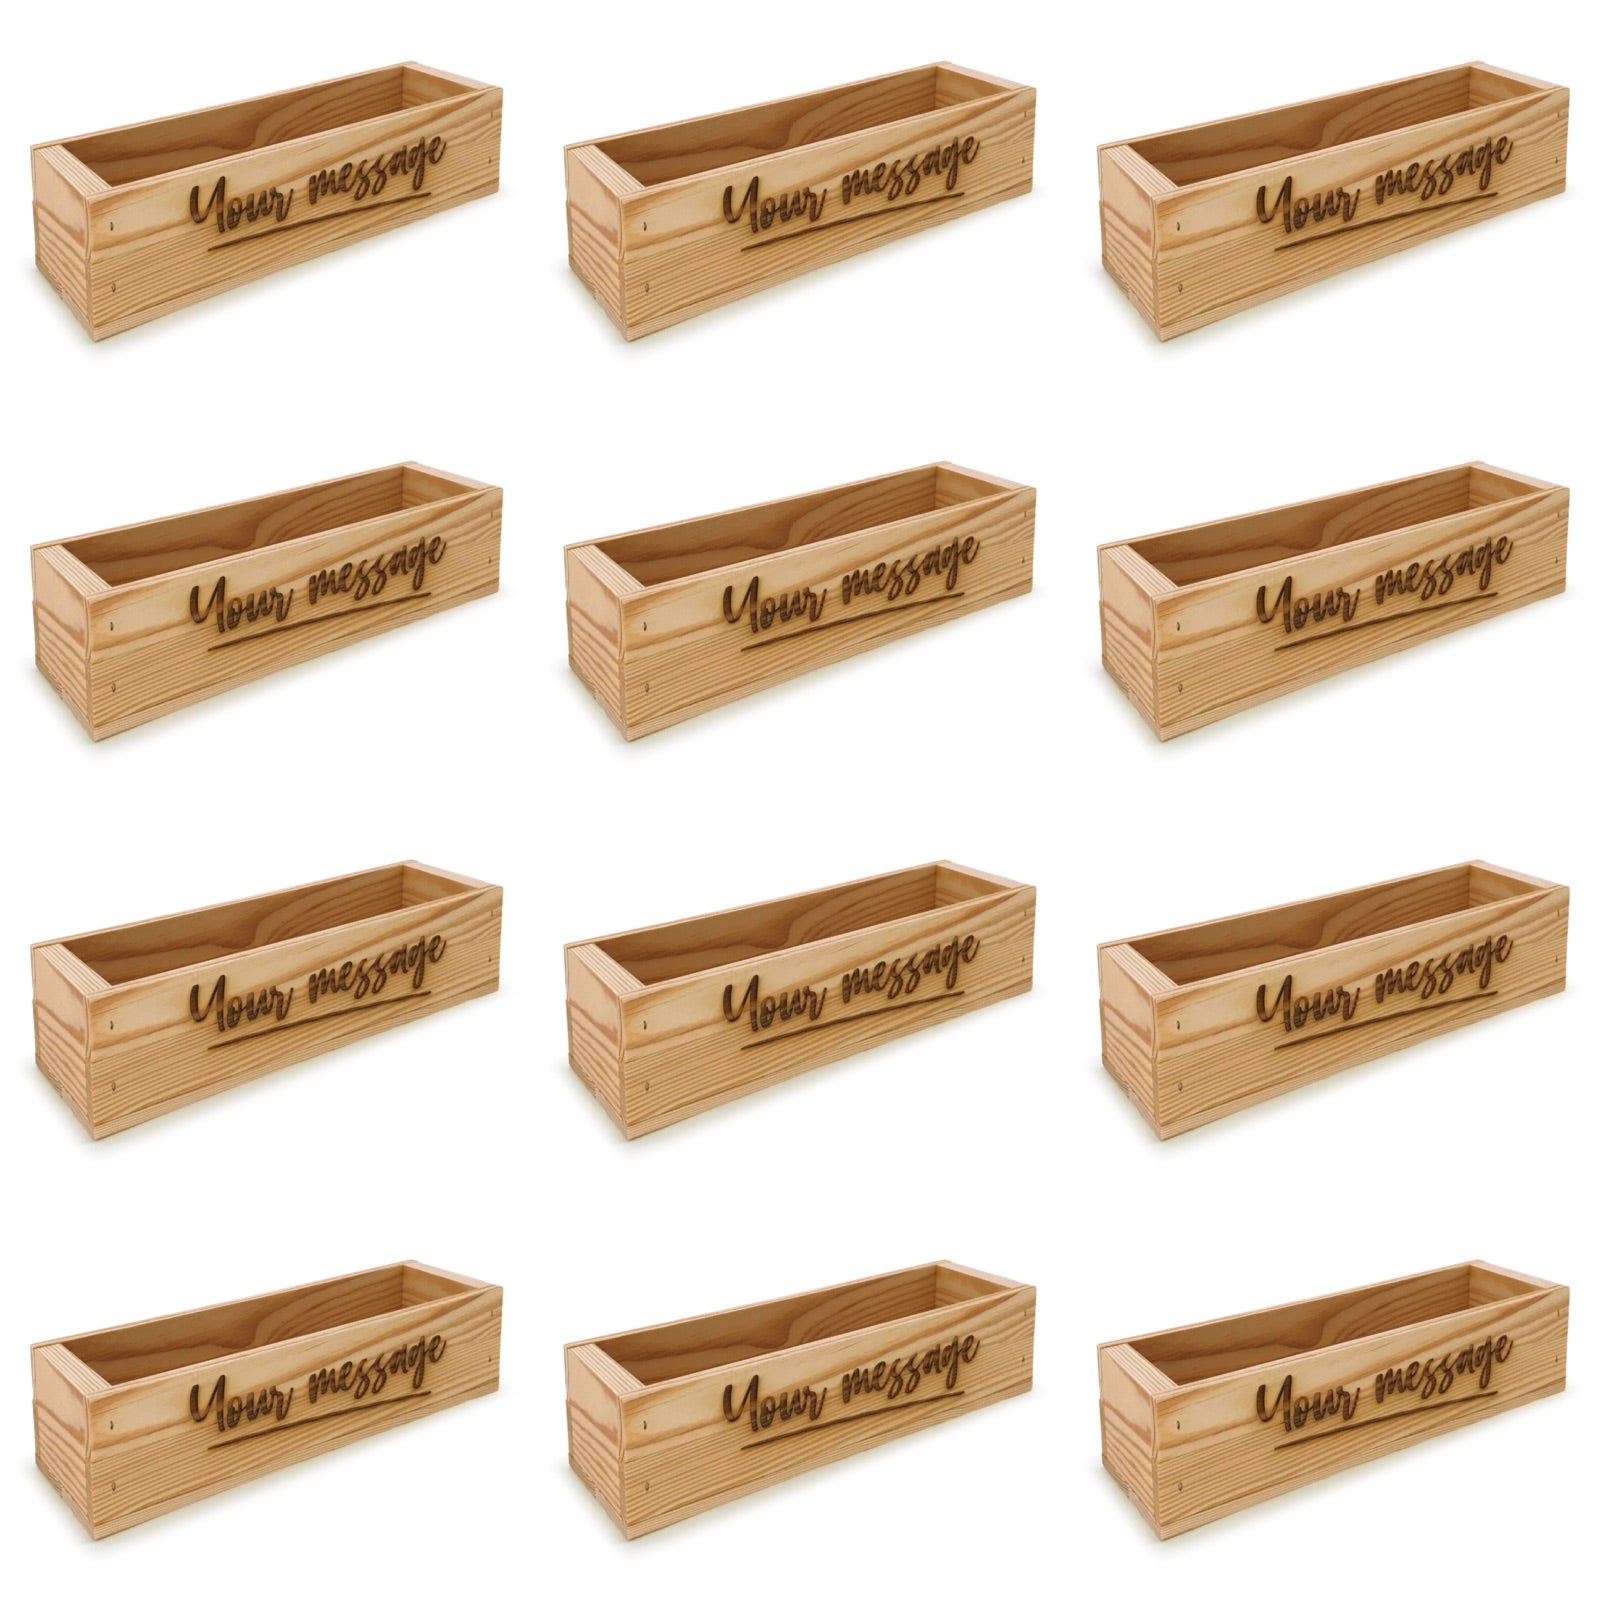 12 Single bottle wine crates with custom message 13x3.5x3.5